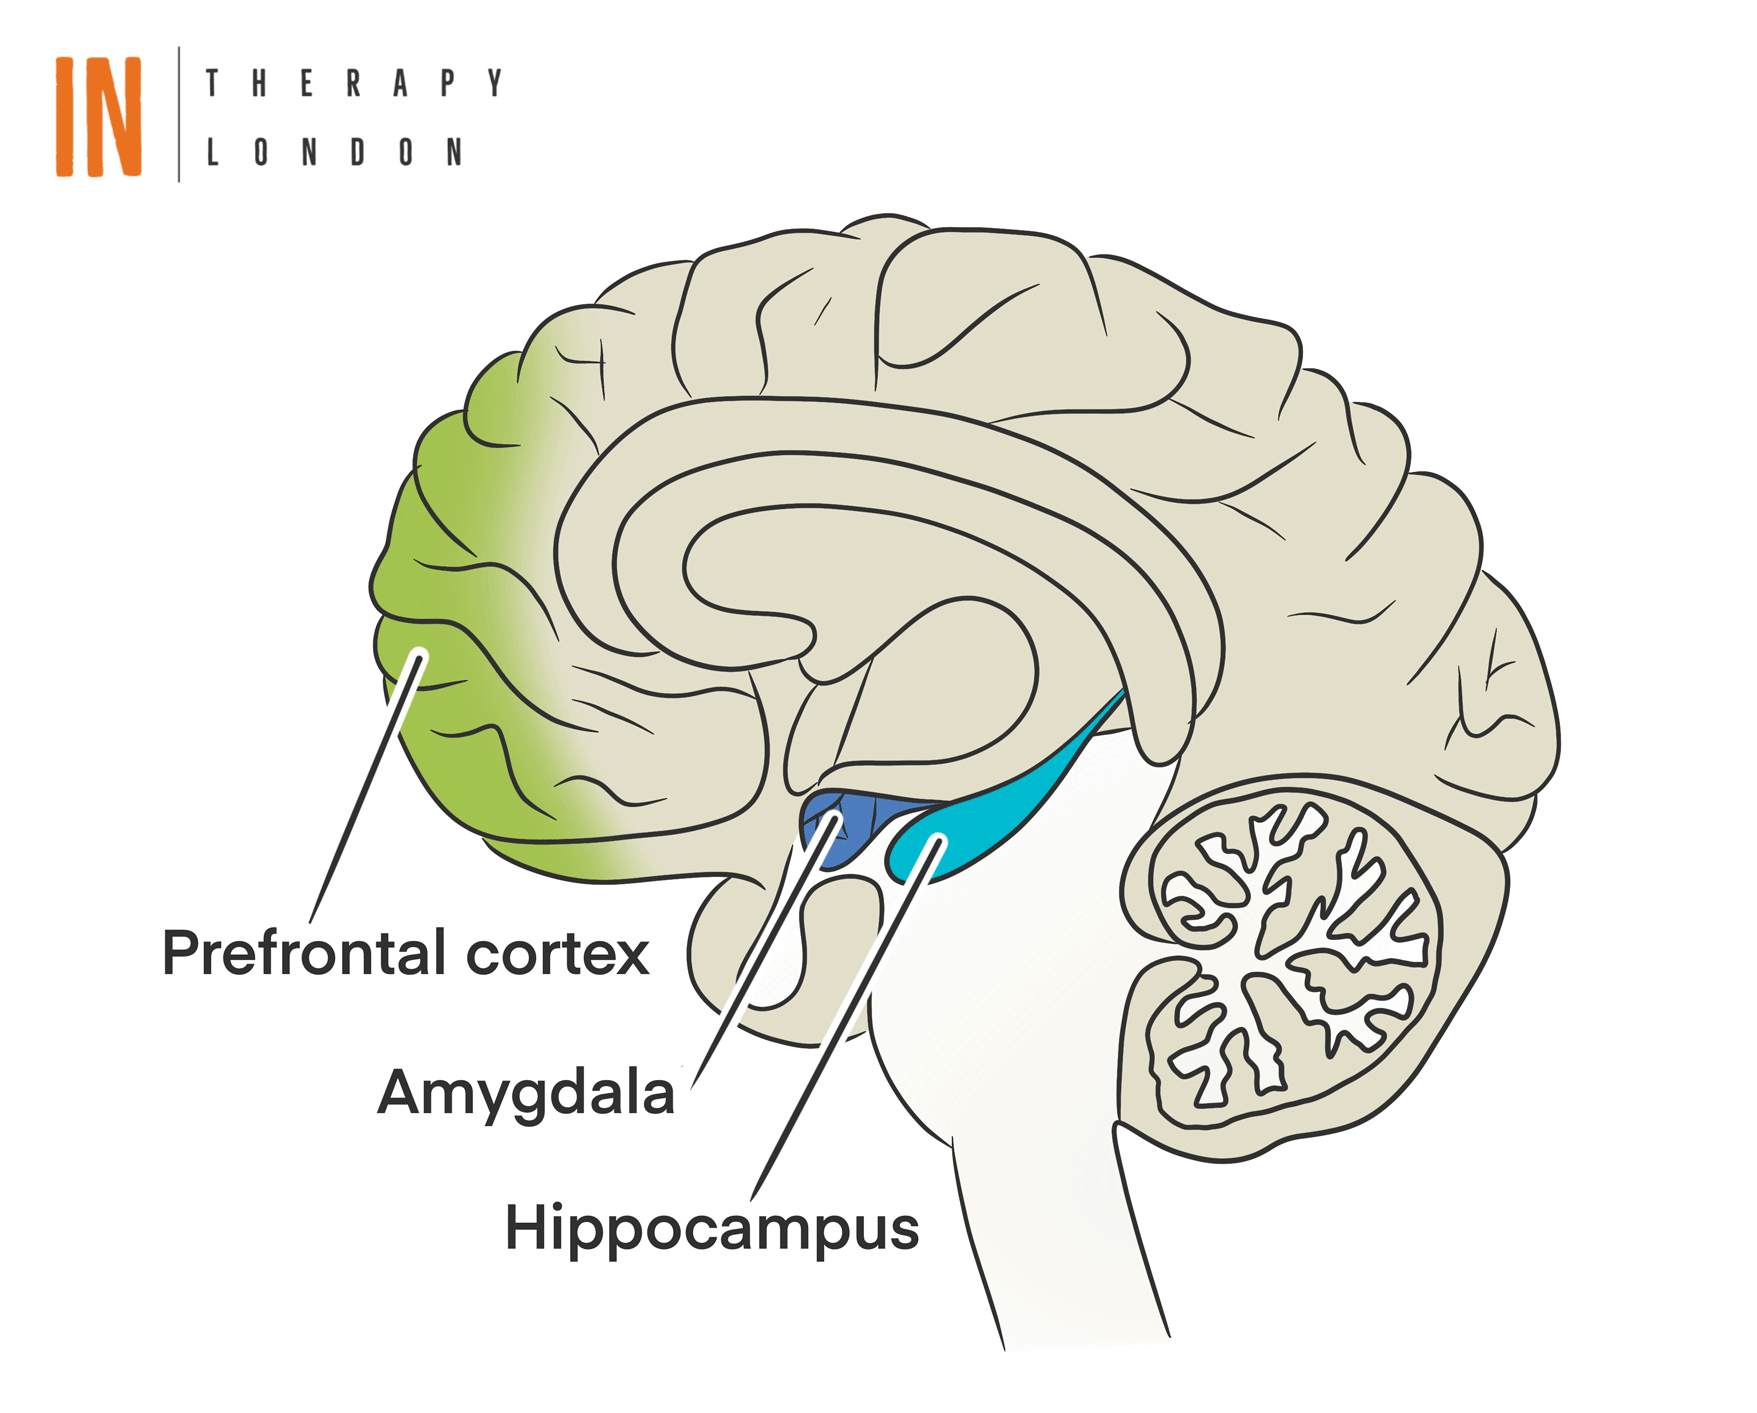 Trauma therapy London - Relationship between the Amygdala and Prefrontal Cortex